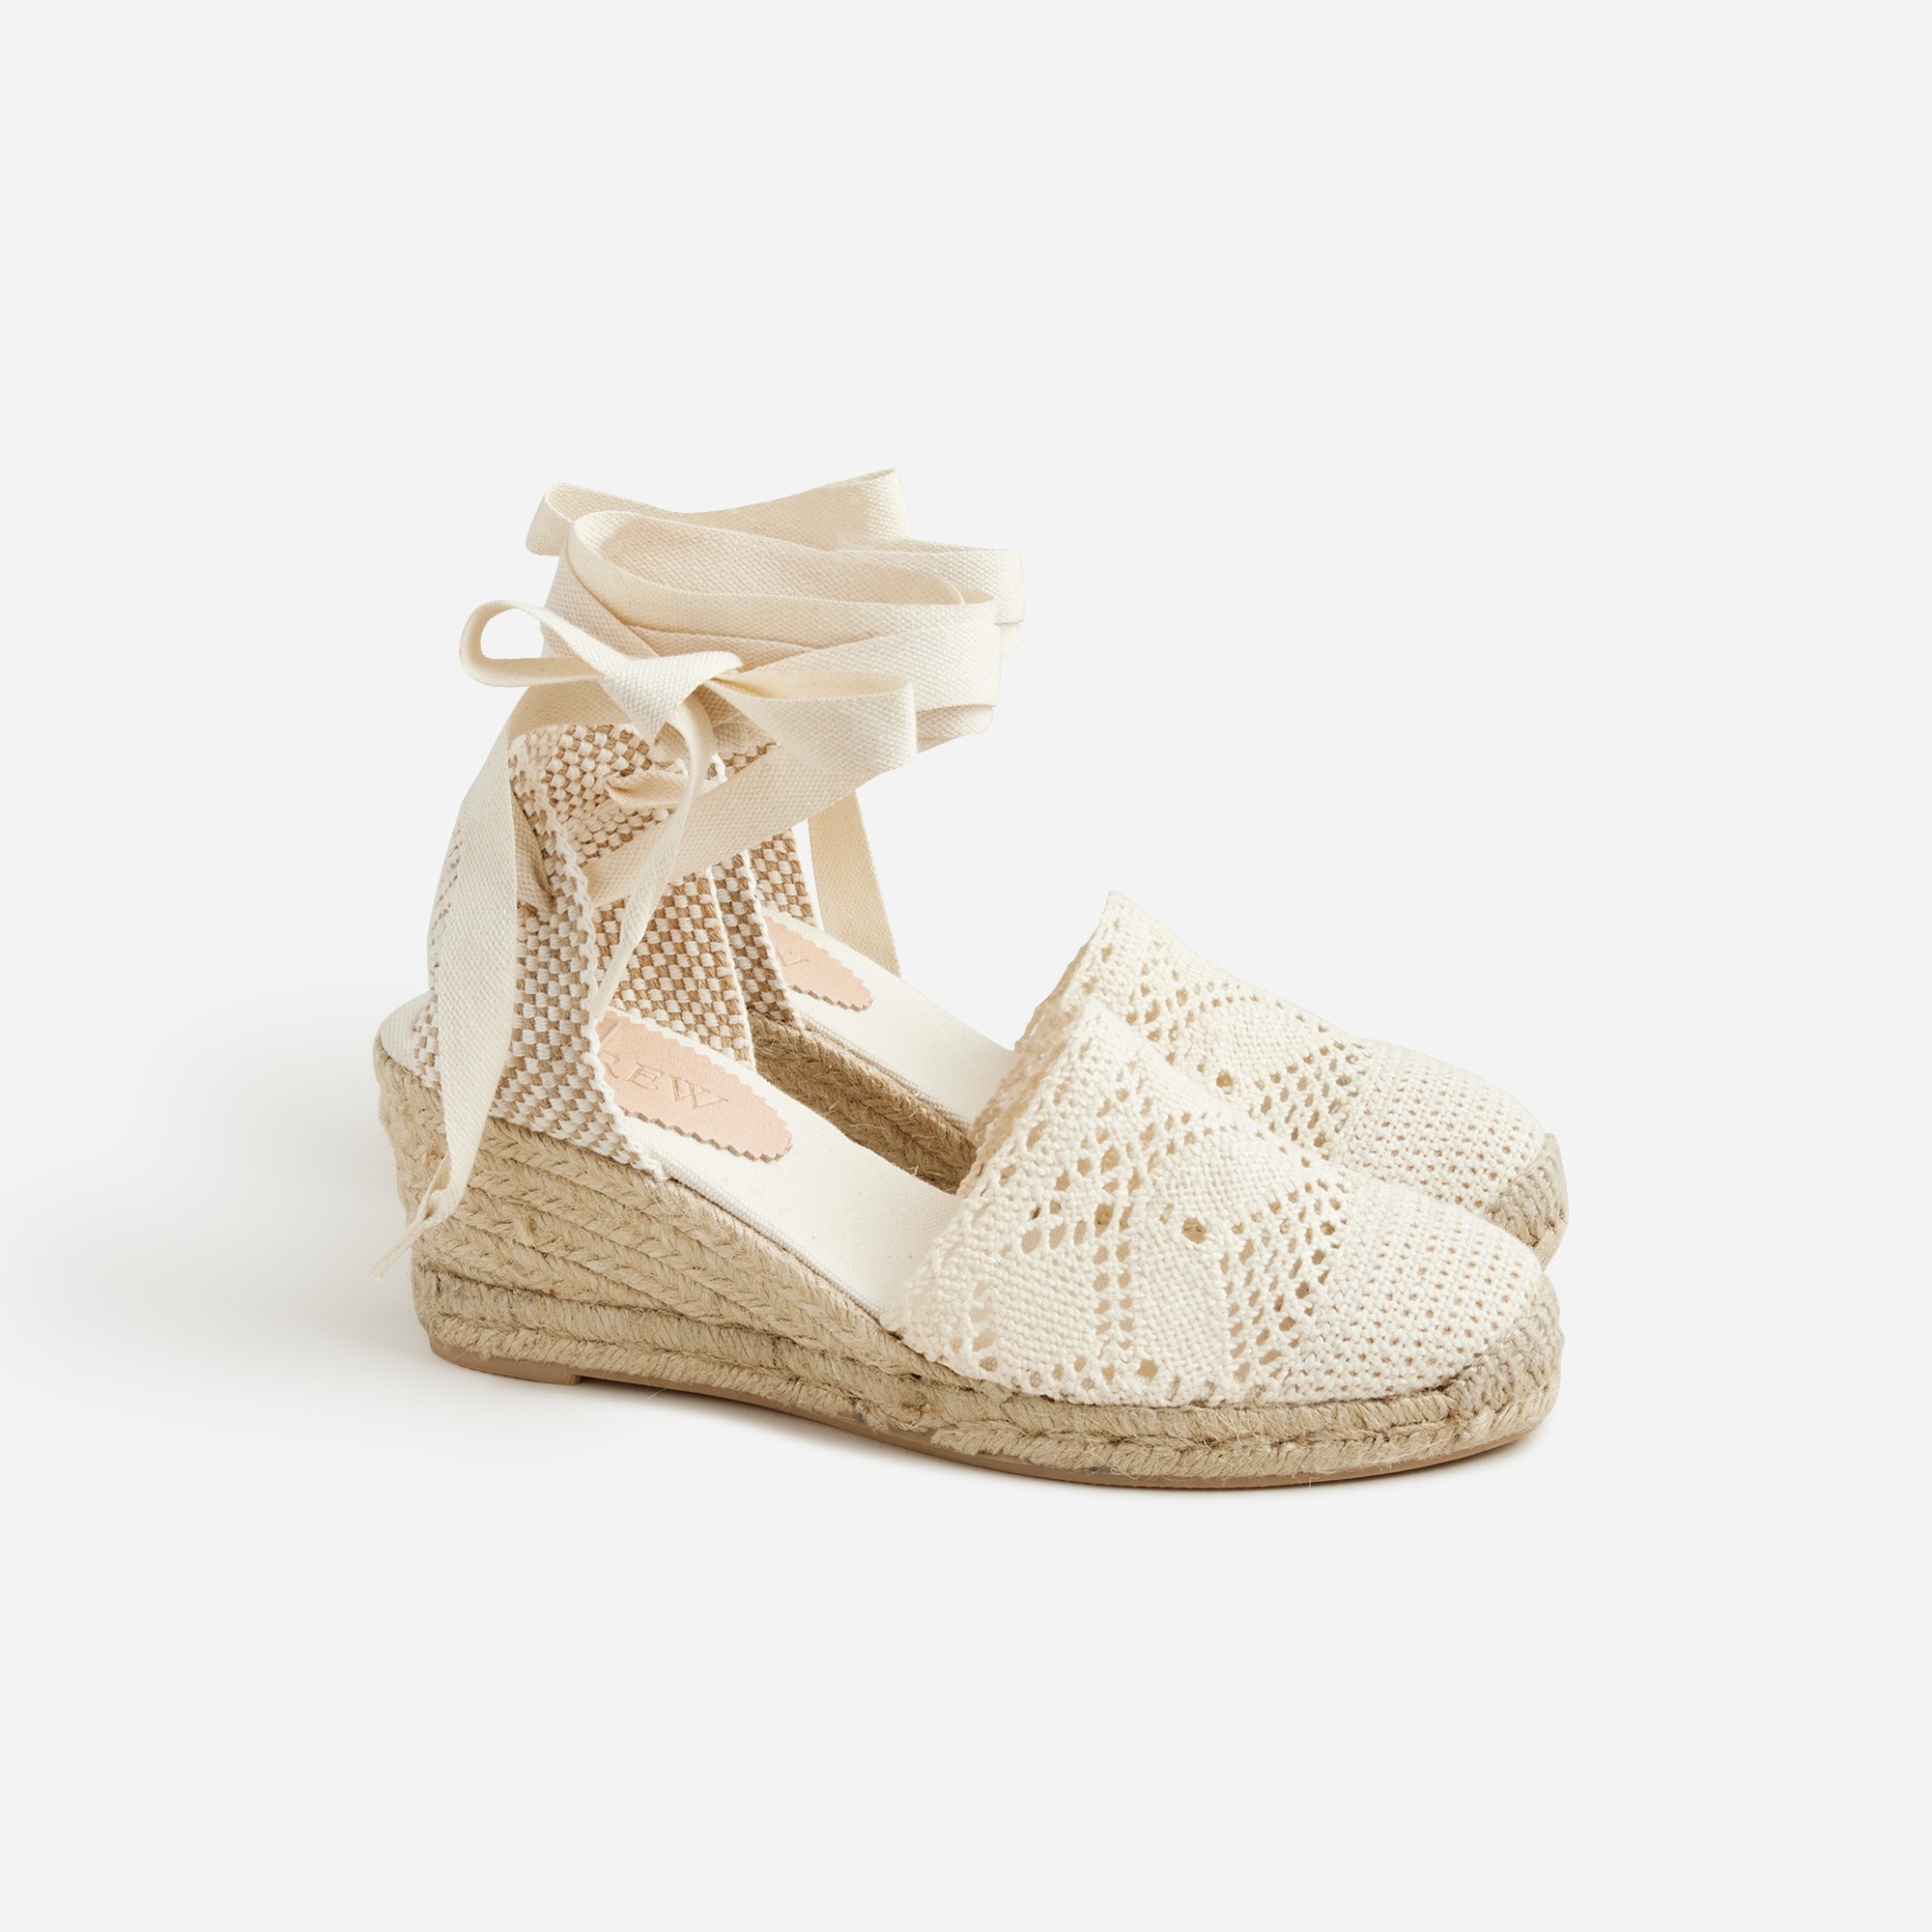  Made-in-Spain lace-up midheel espadrilles with crochet